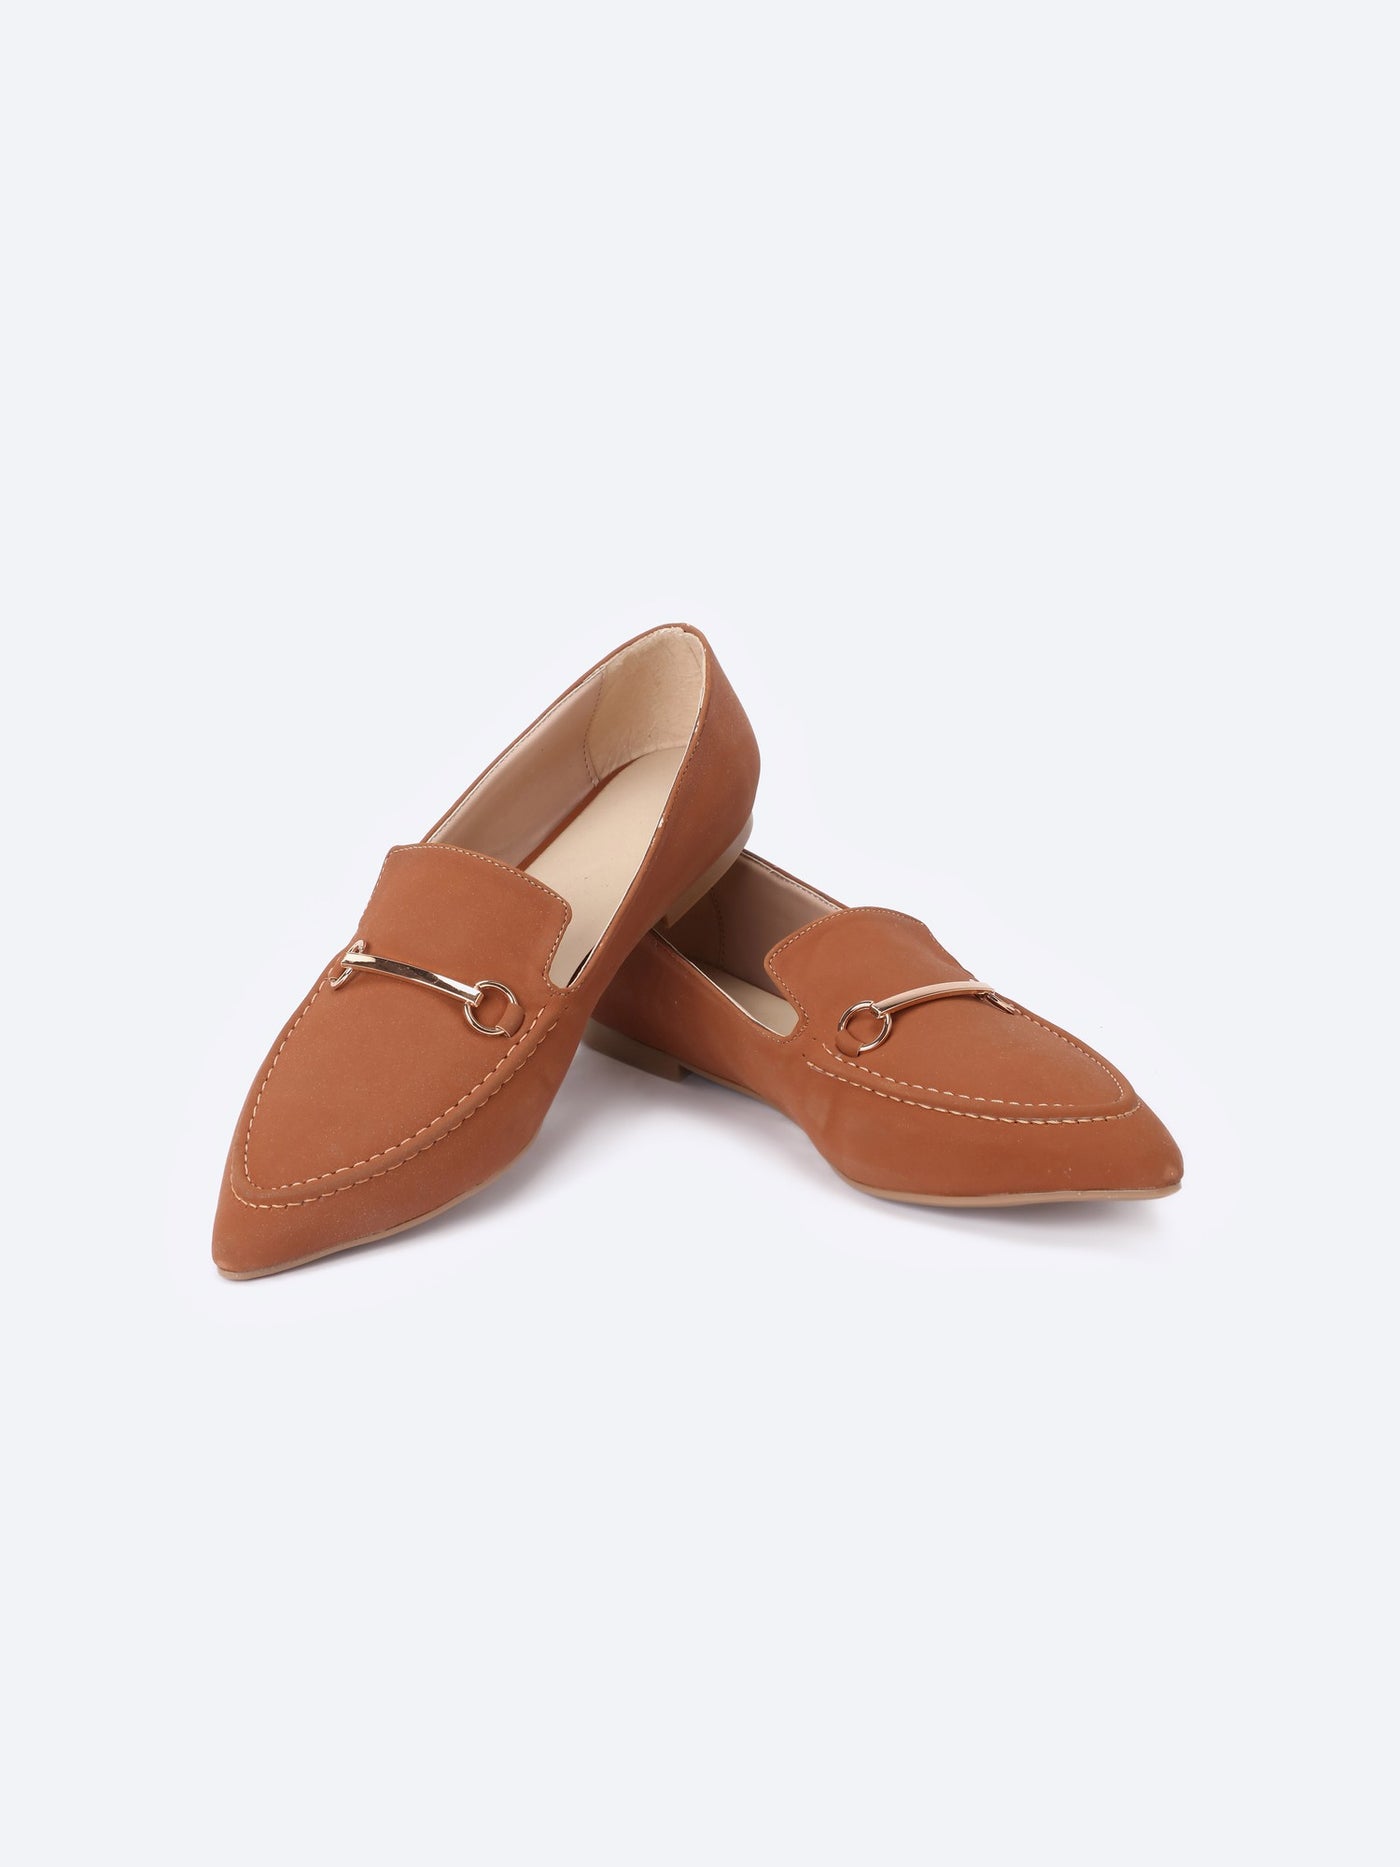 Loafer Shoes - Pointed Toe - Horsebit Detail